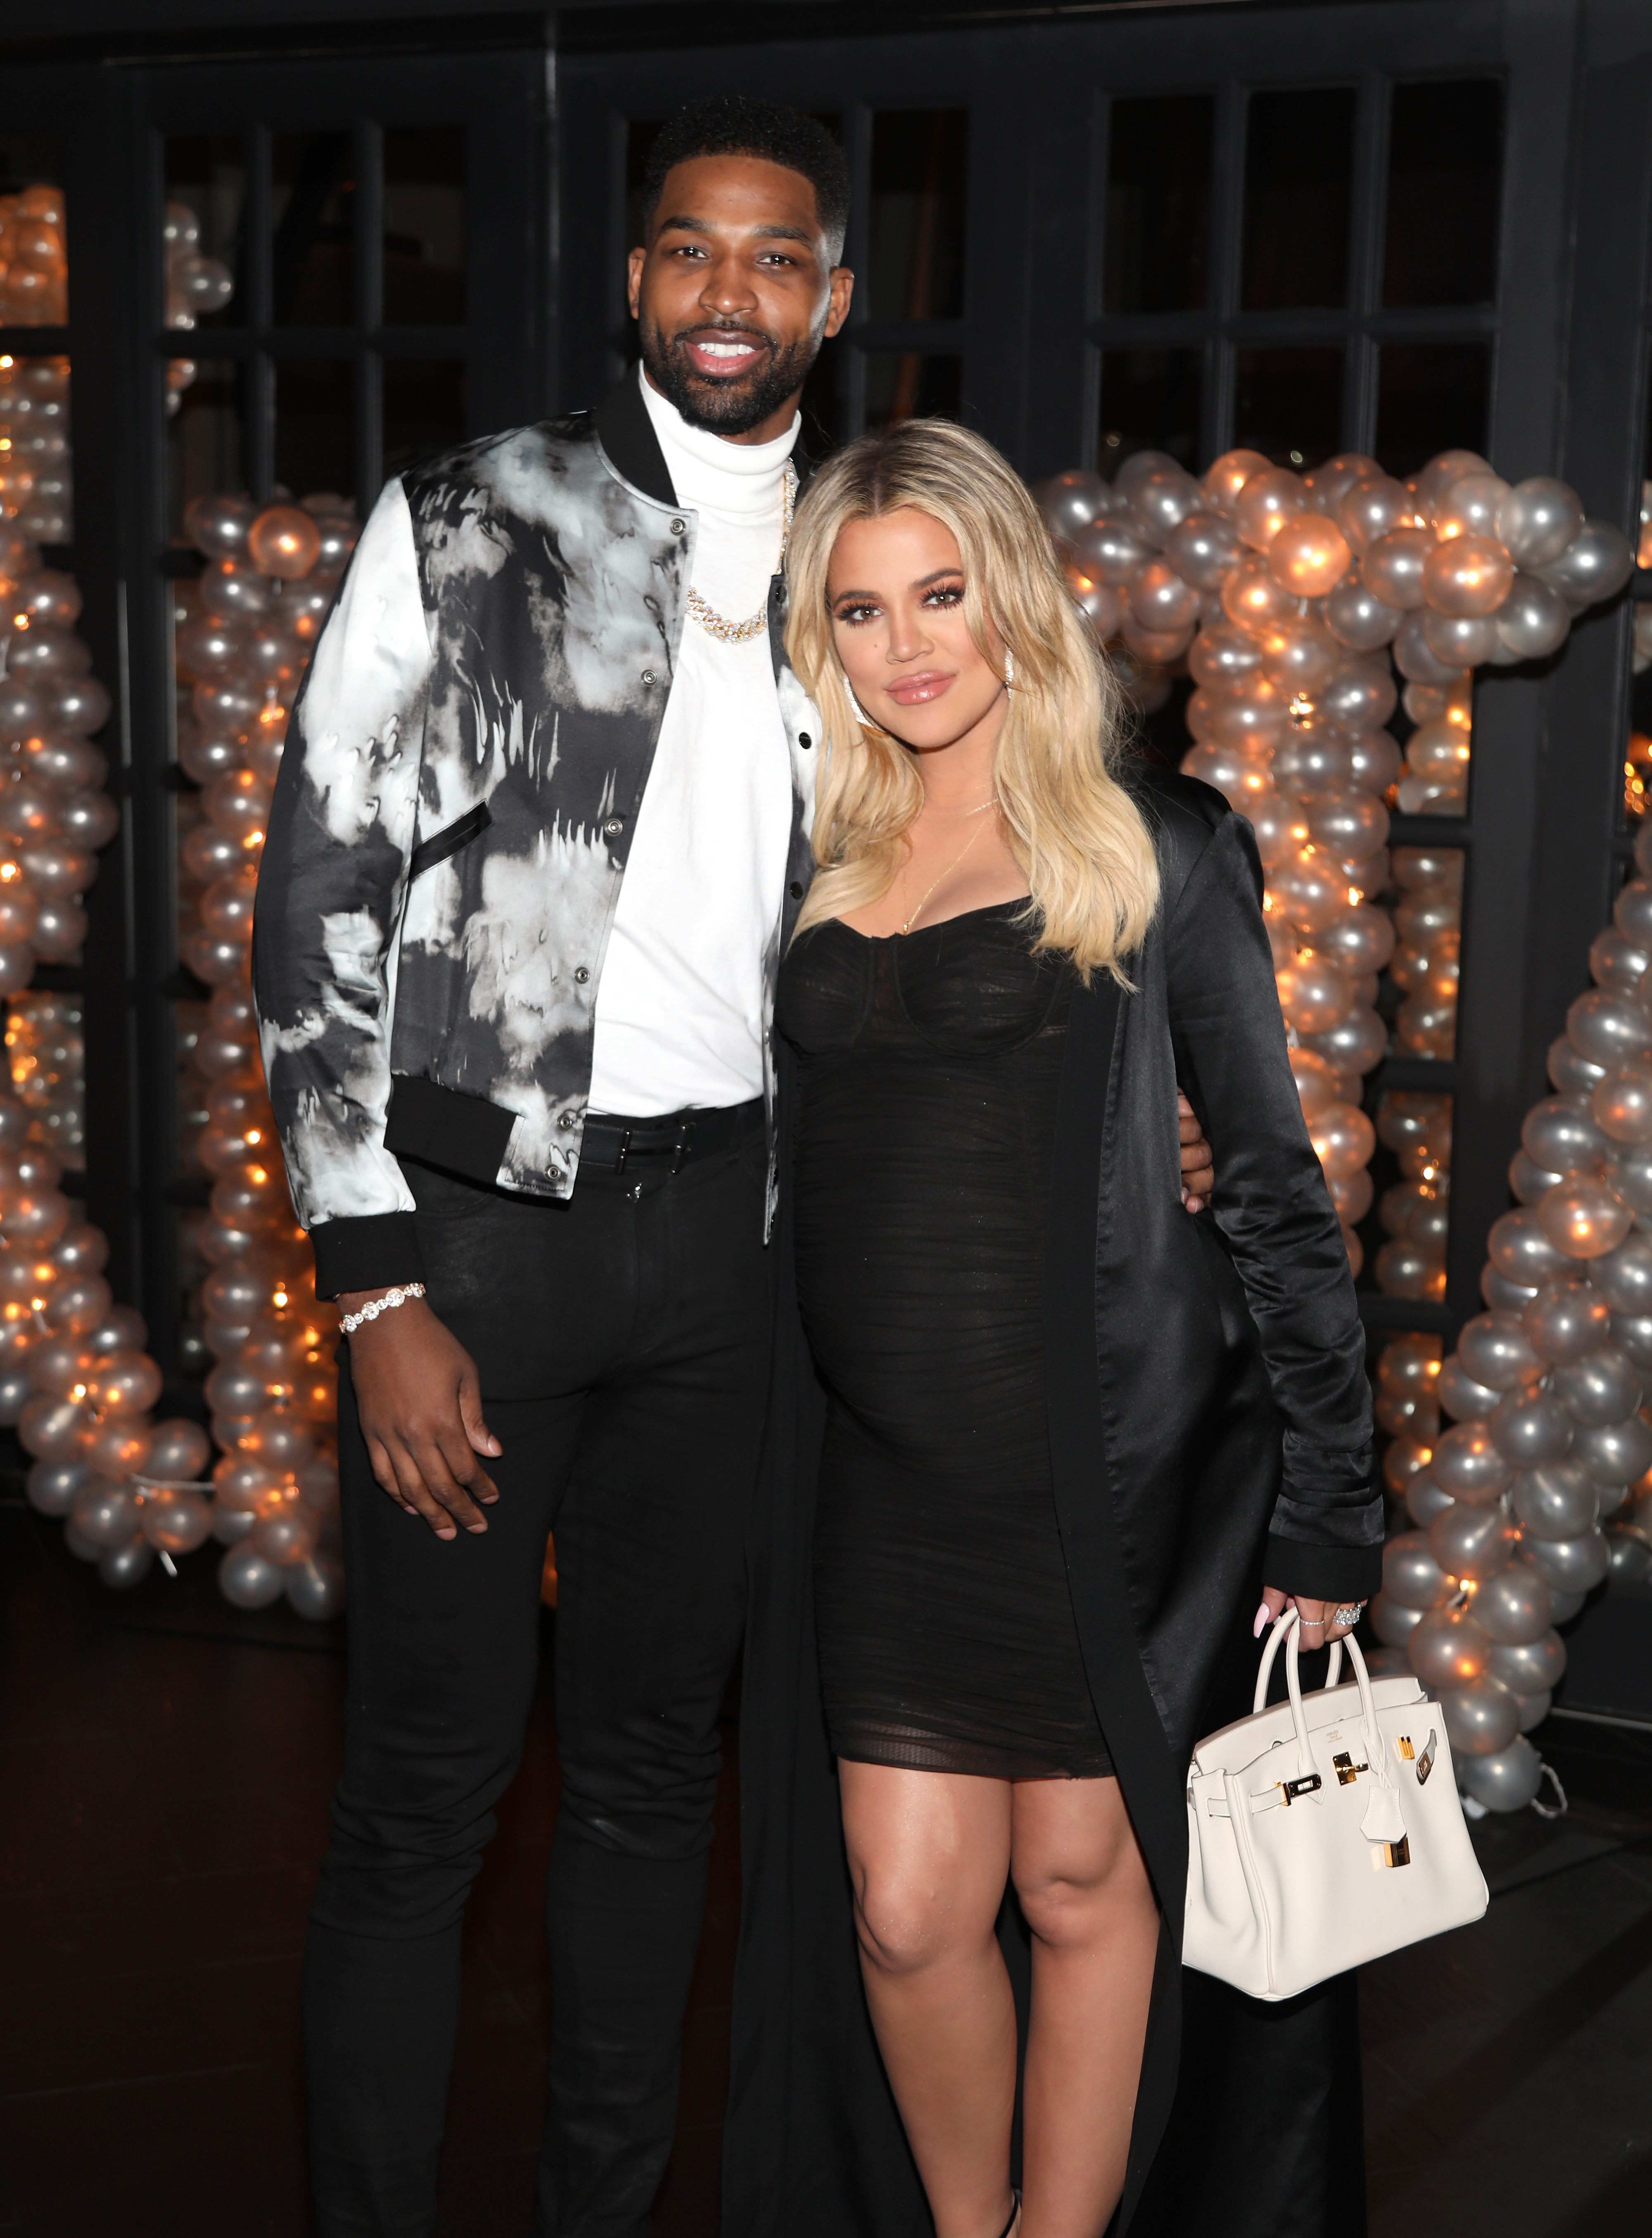 Tristan and Khloé posing for a photo at an event